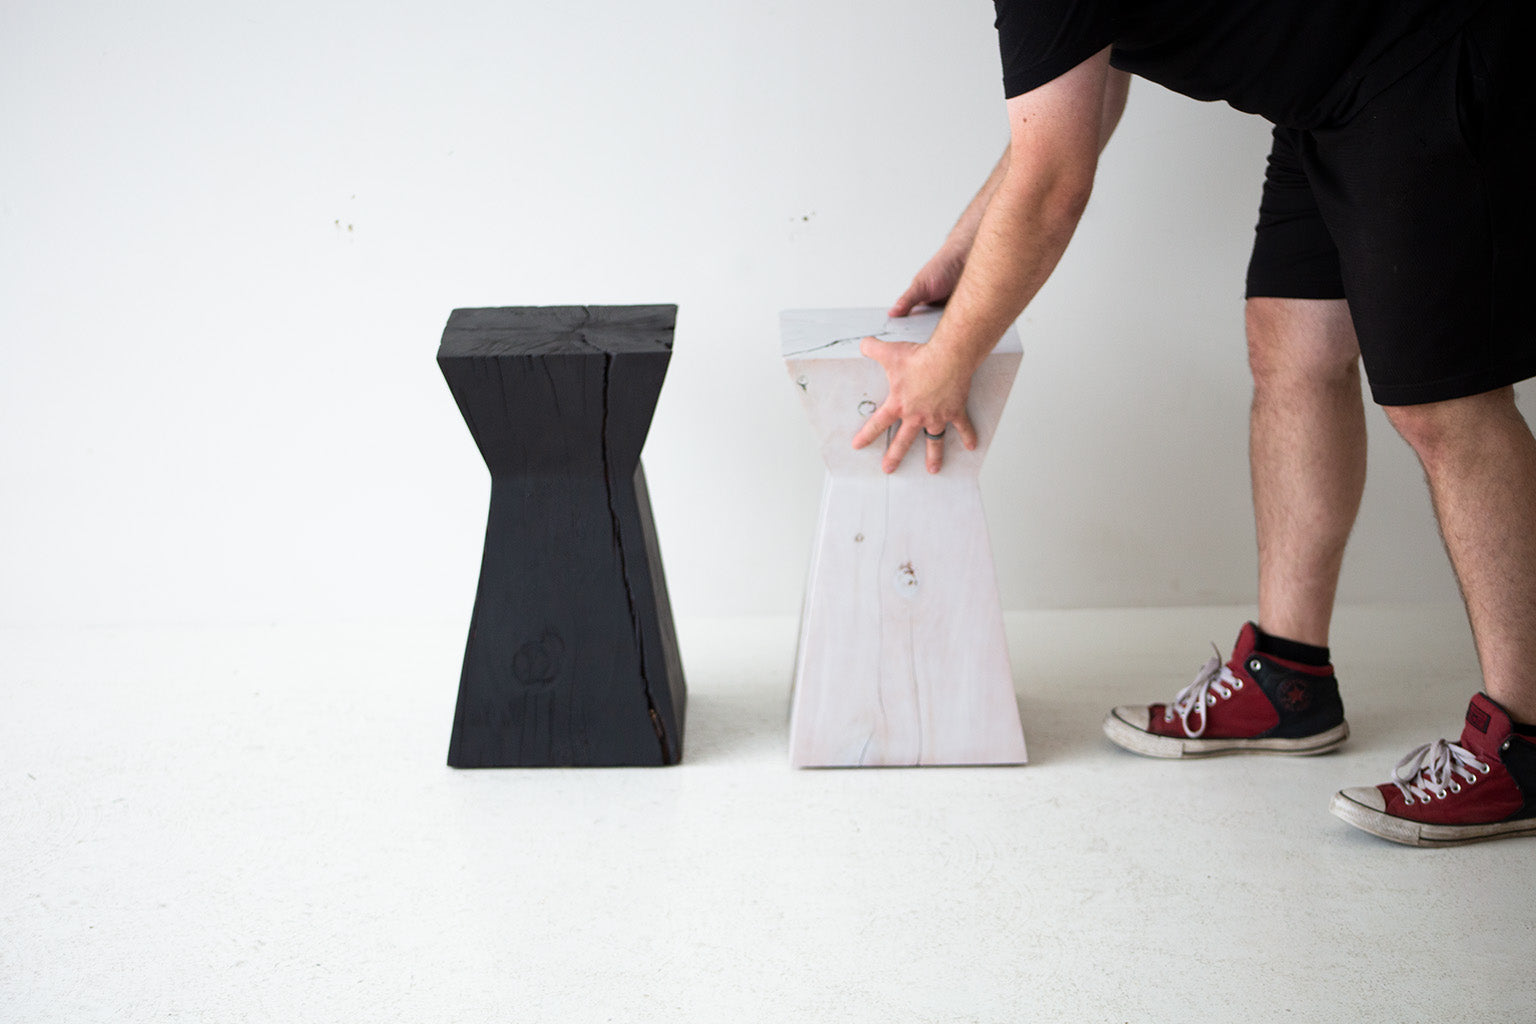 Sculpted Stump Table - The Sol - 2222